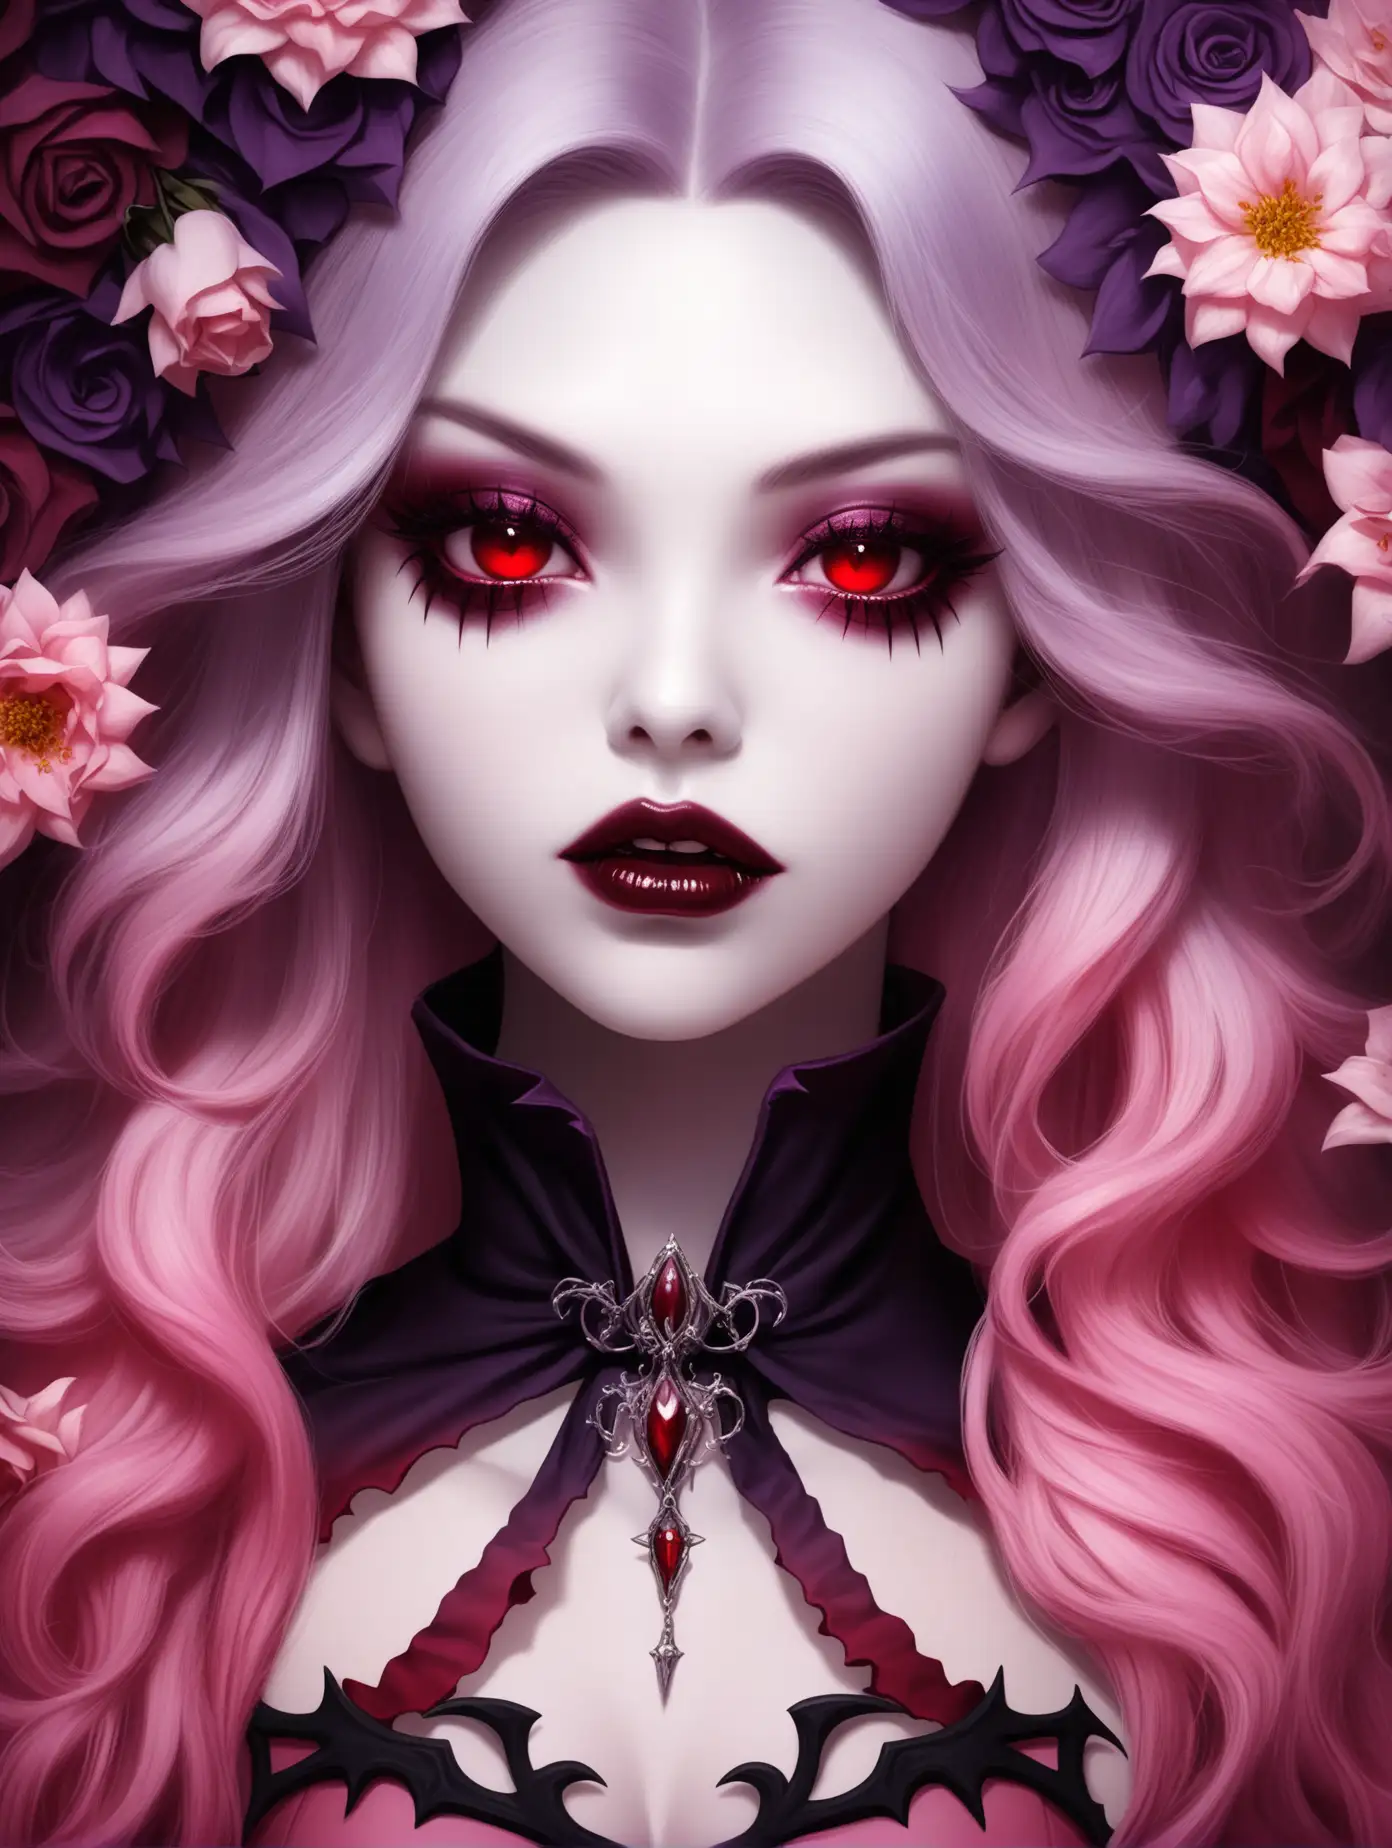 Enchanting Mystic Vampire Girl Surrounded by Pink Flowers